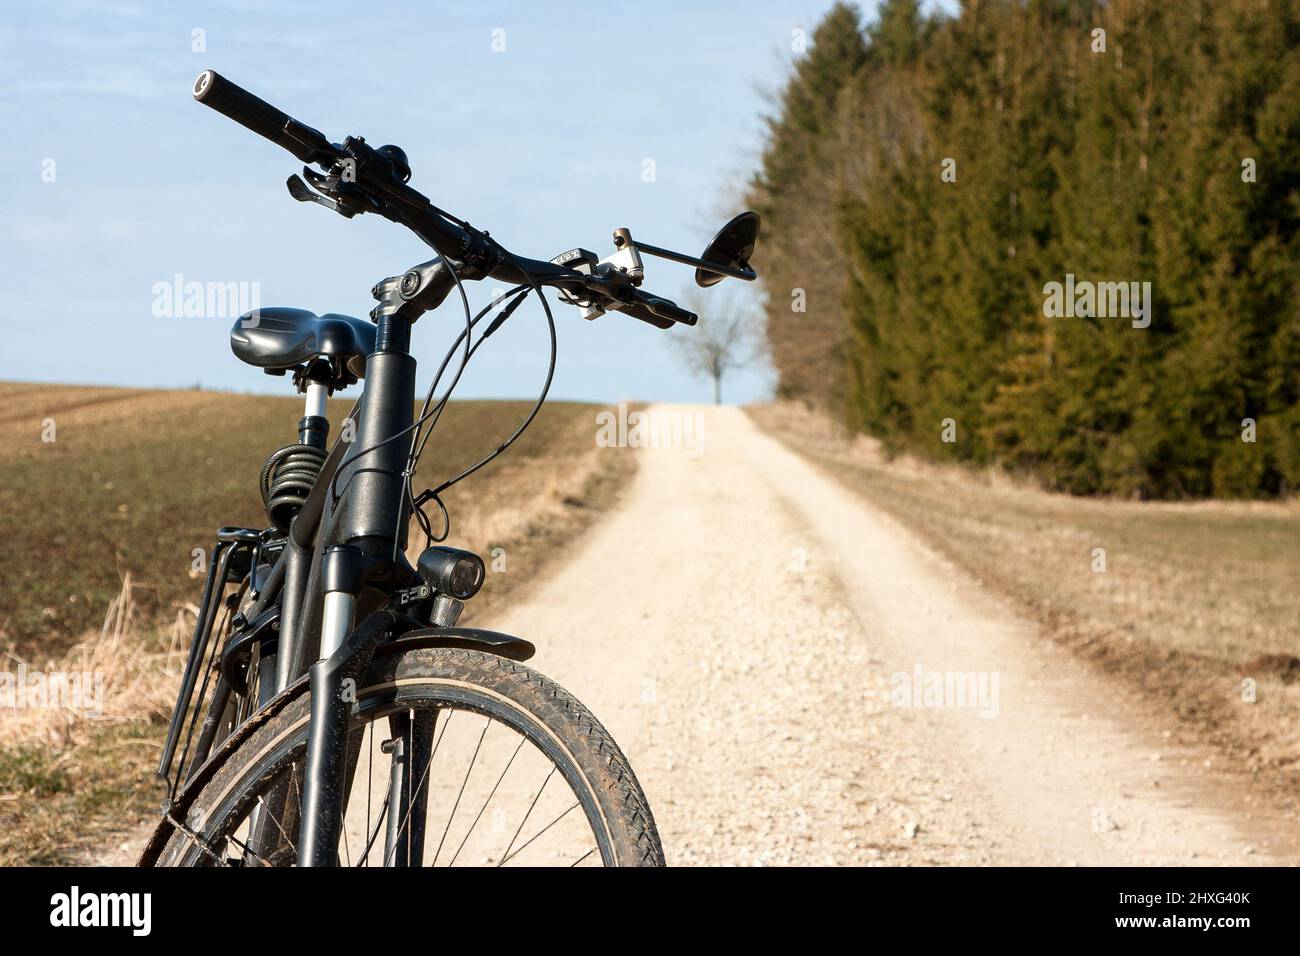 On the way with the trekking bike on remote country lanes through the spring-like nature. Stock Photo